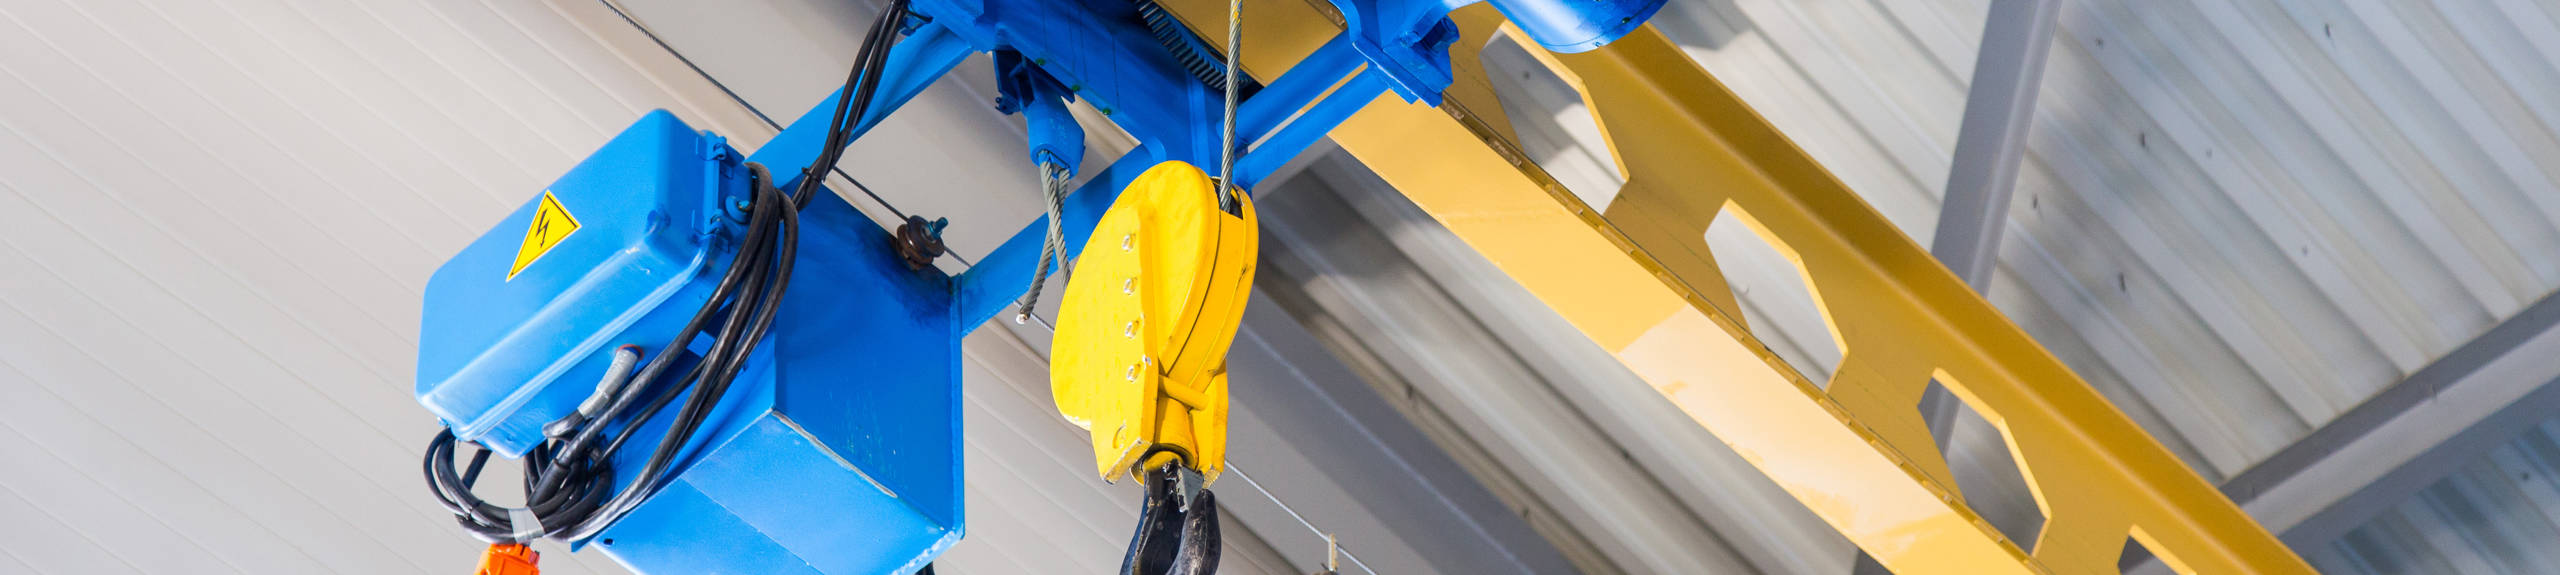 A yellow and blue overhead warehouse crane.